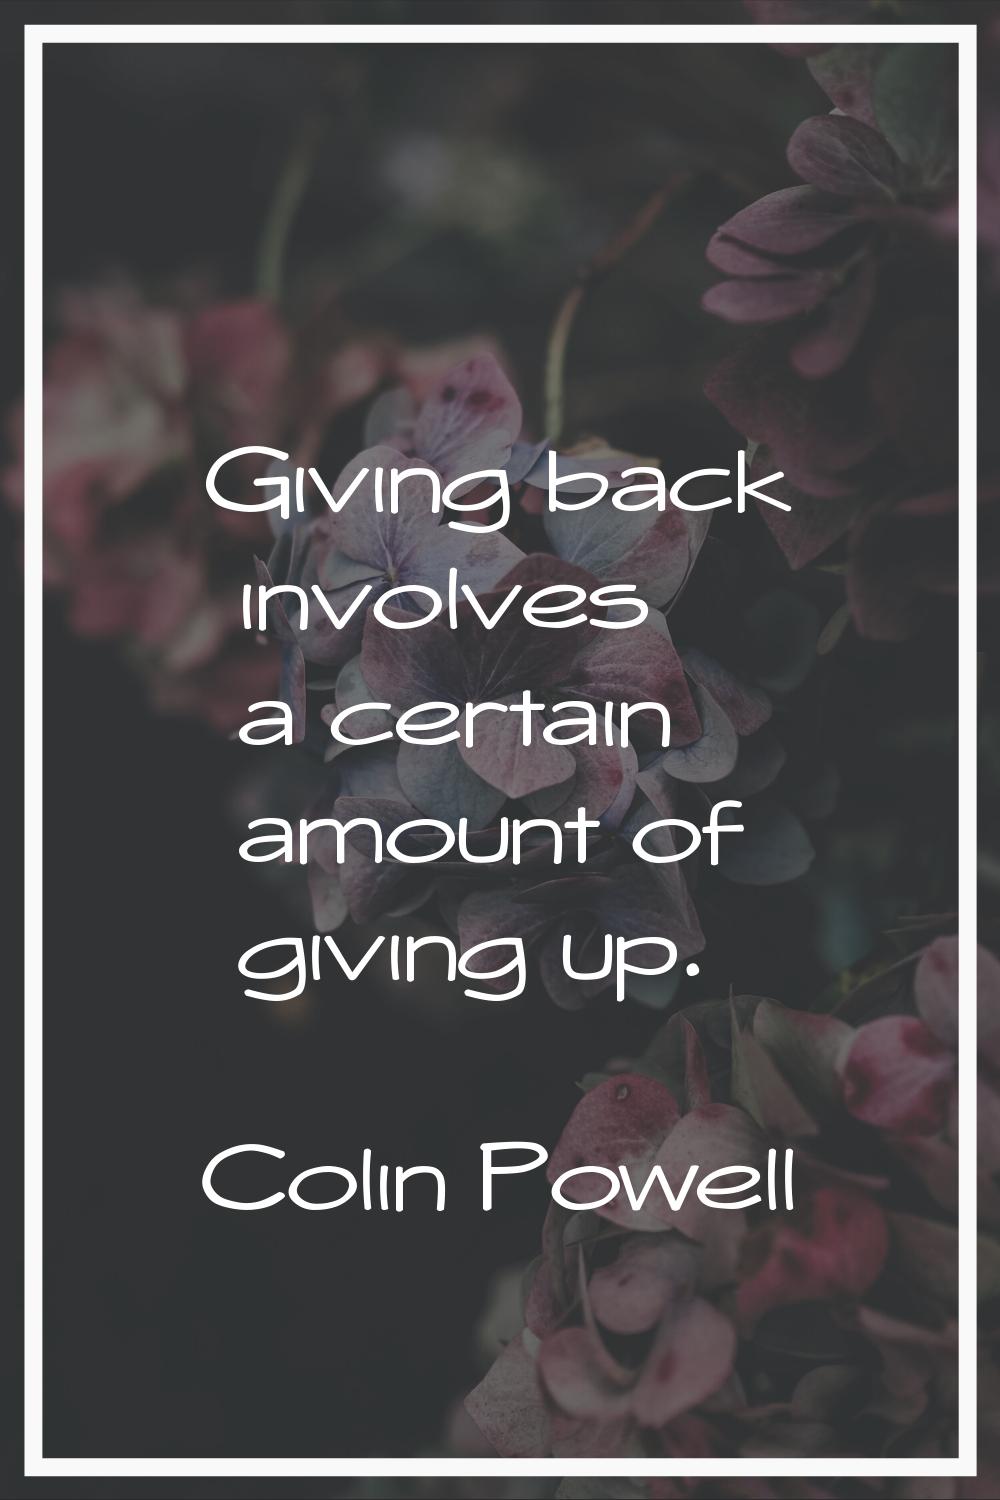 Giving back involves a certain amount of giving up.